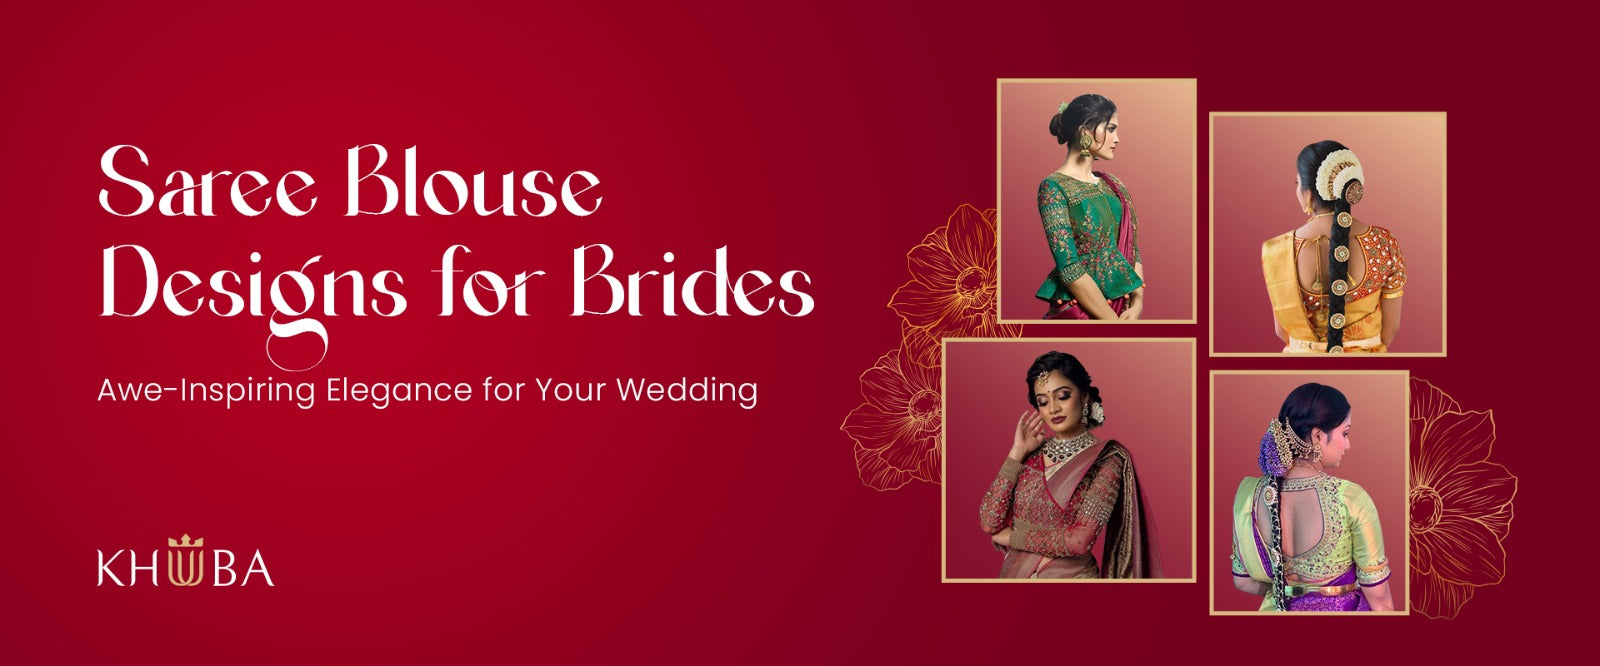 Gowns and Dress Ideas from Your Mom's Old Silk Sarees - Ethnic Fashion  Inspirations!